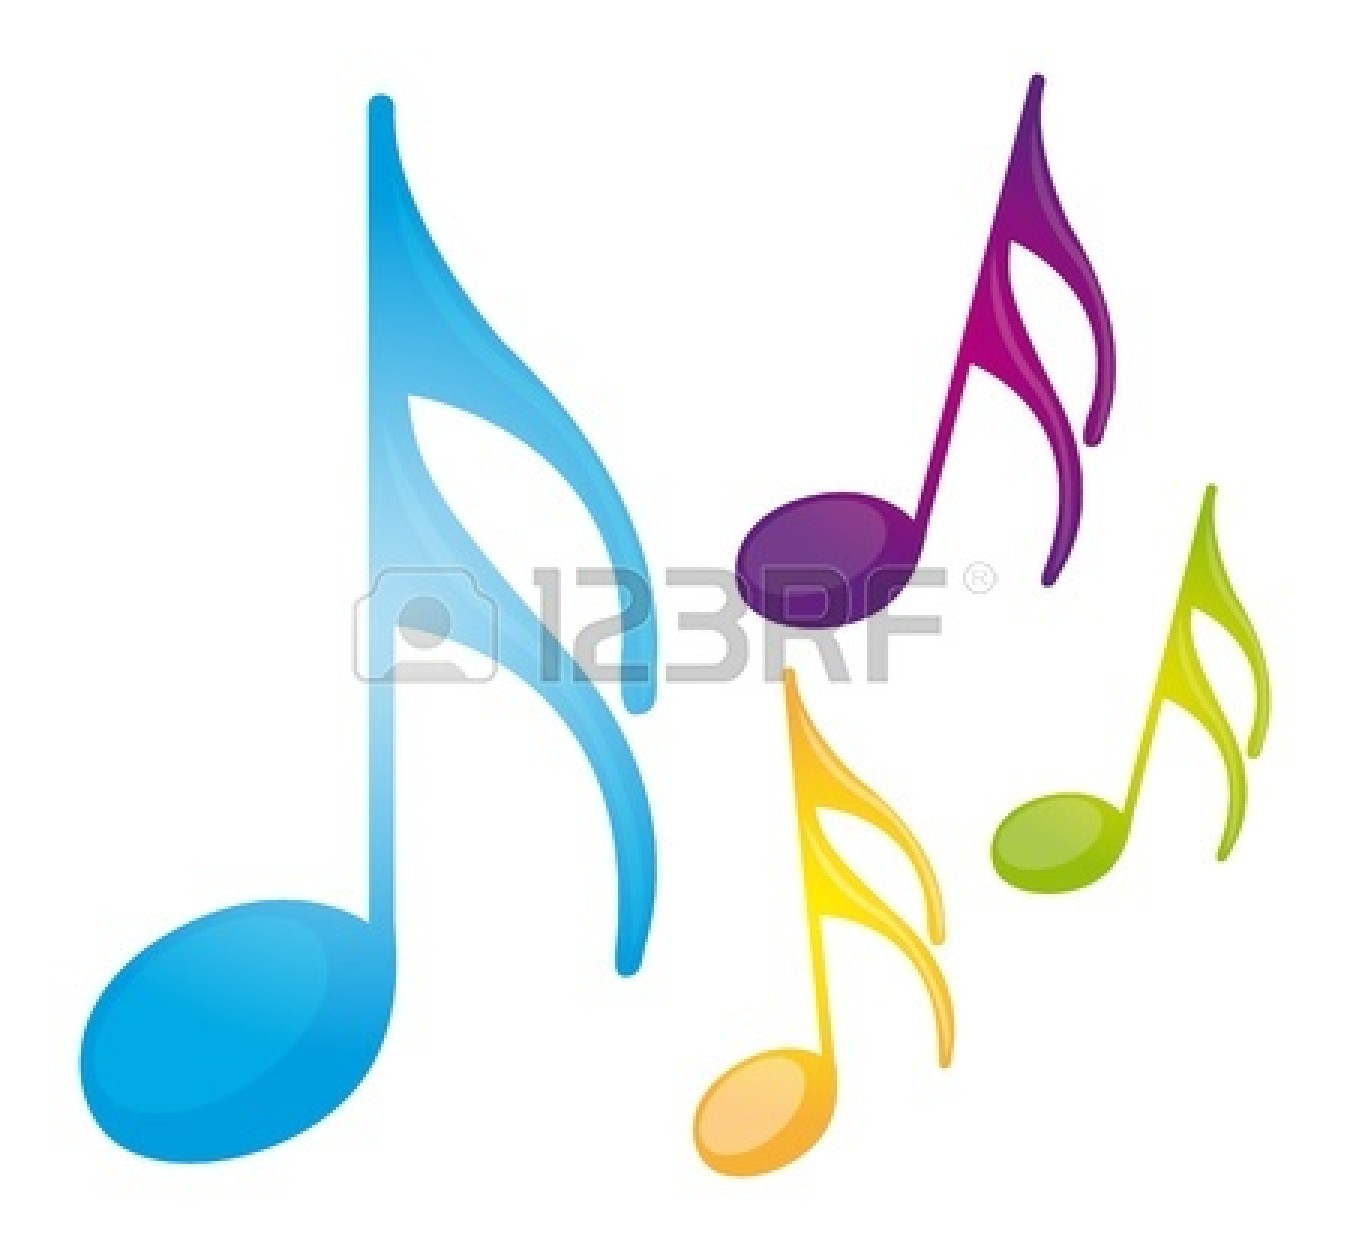 Colorful Music Clip Art 11890298 Colorful Music Notes Isolated Over